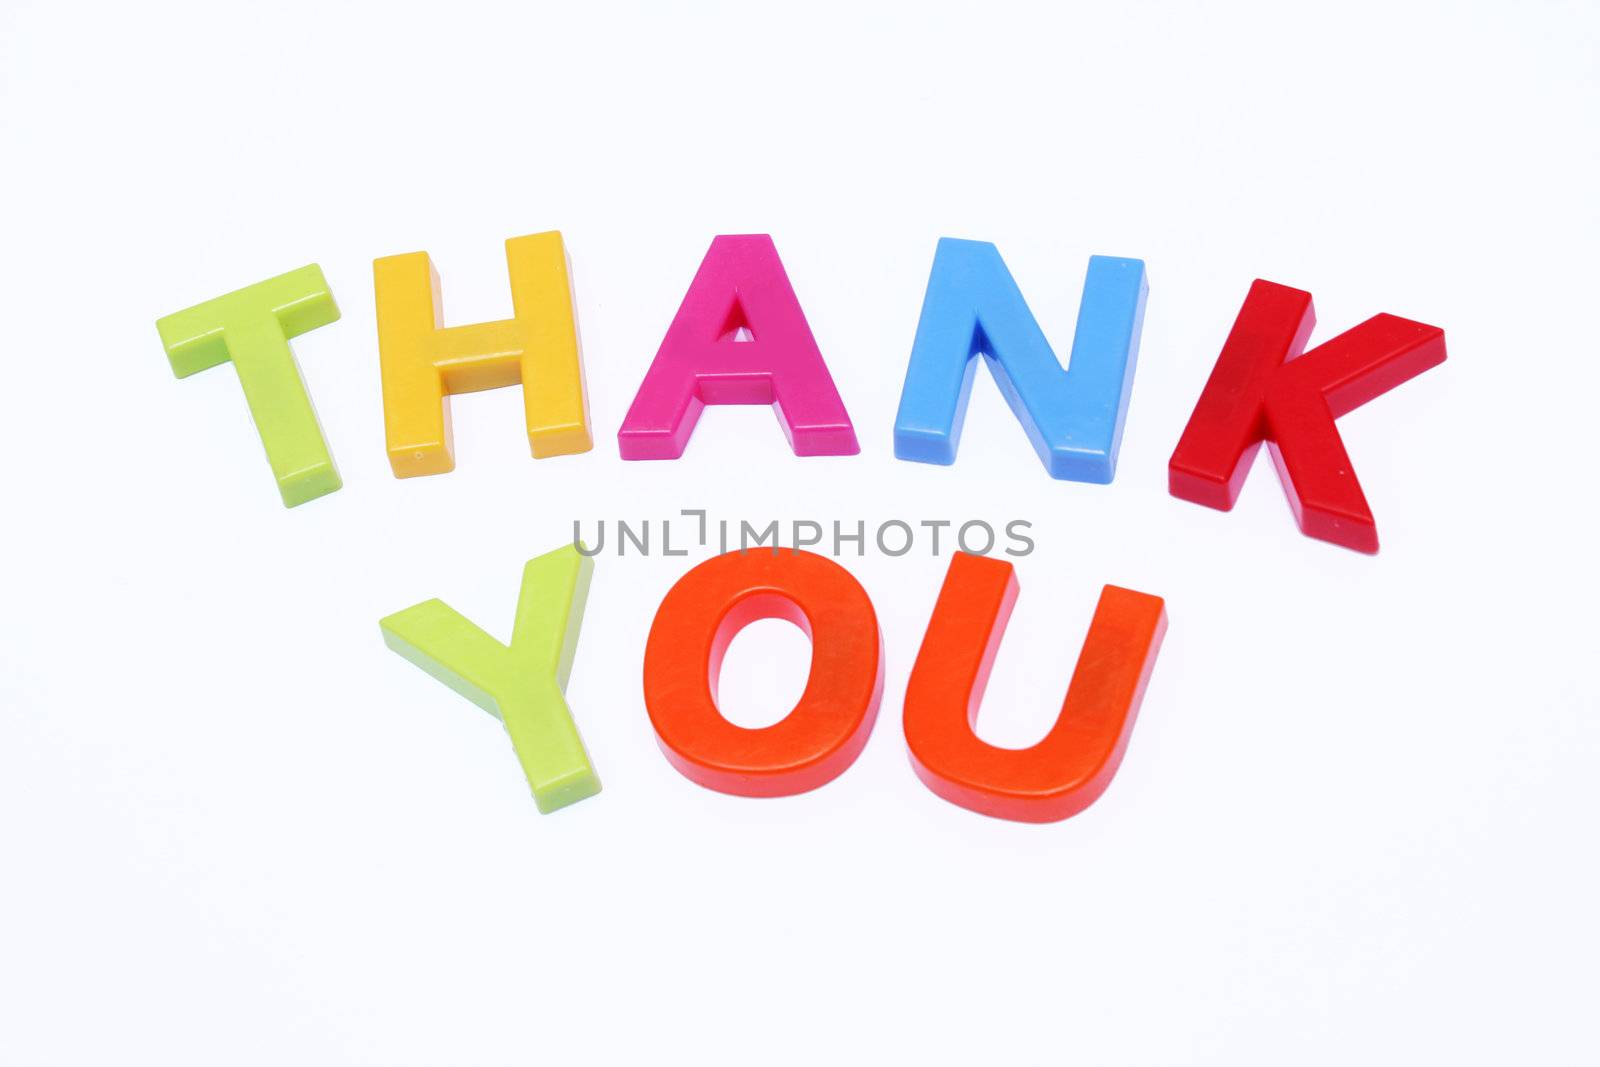 fridge magnet spelt out thank you isolated on white